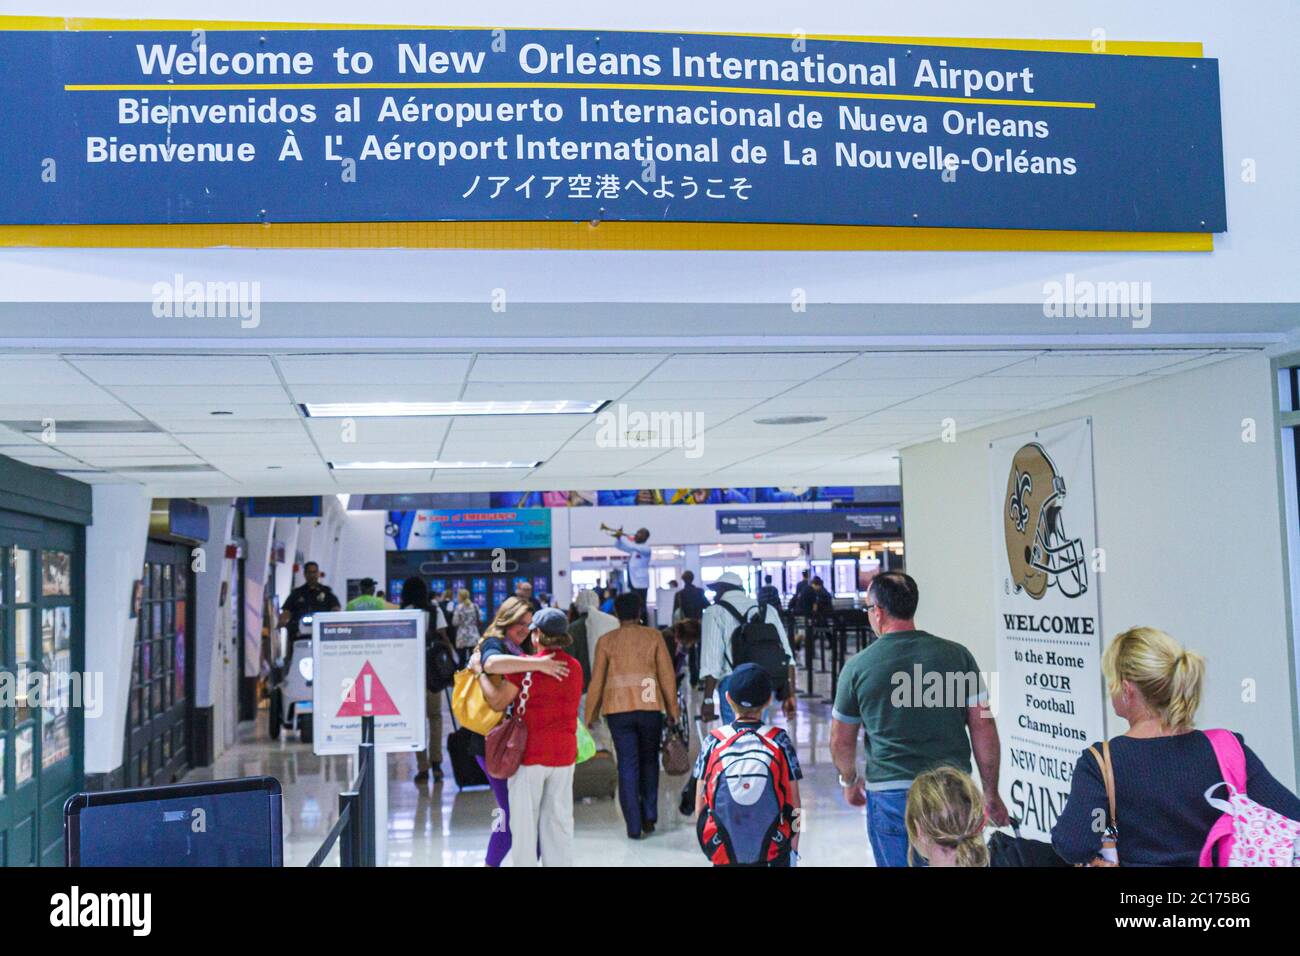 New Orleans Louisiana, Louis Armstrong New Orleans International Airport, MSY, terminal, cartello, benvenuto, multilingue, spagnolo, inglese, francese, giapponese, passeng Foto Stock